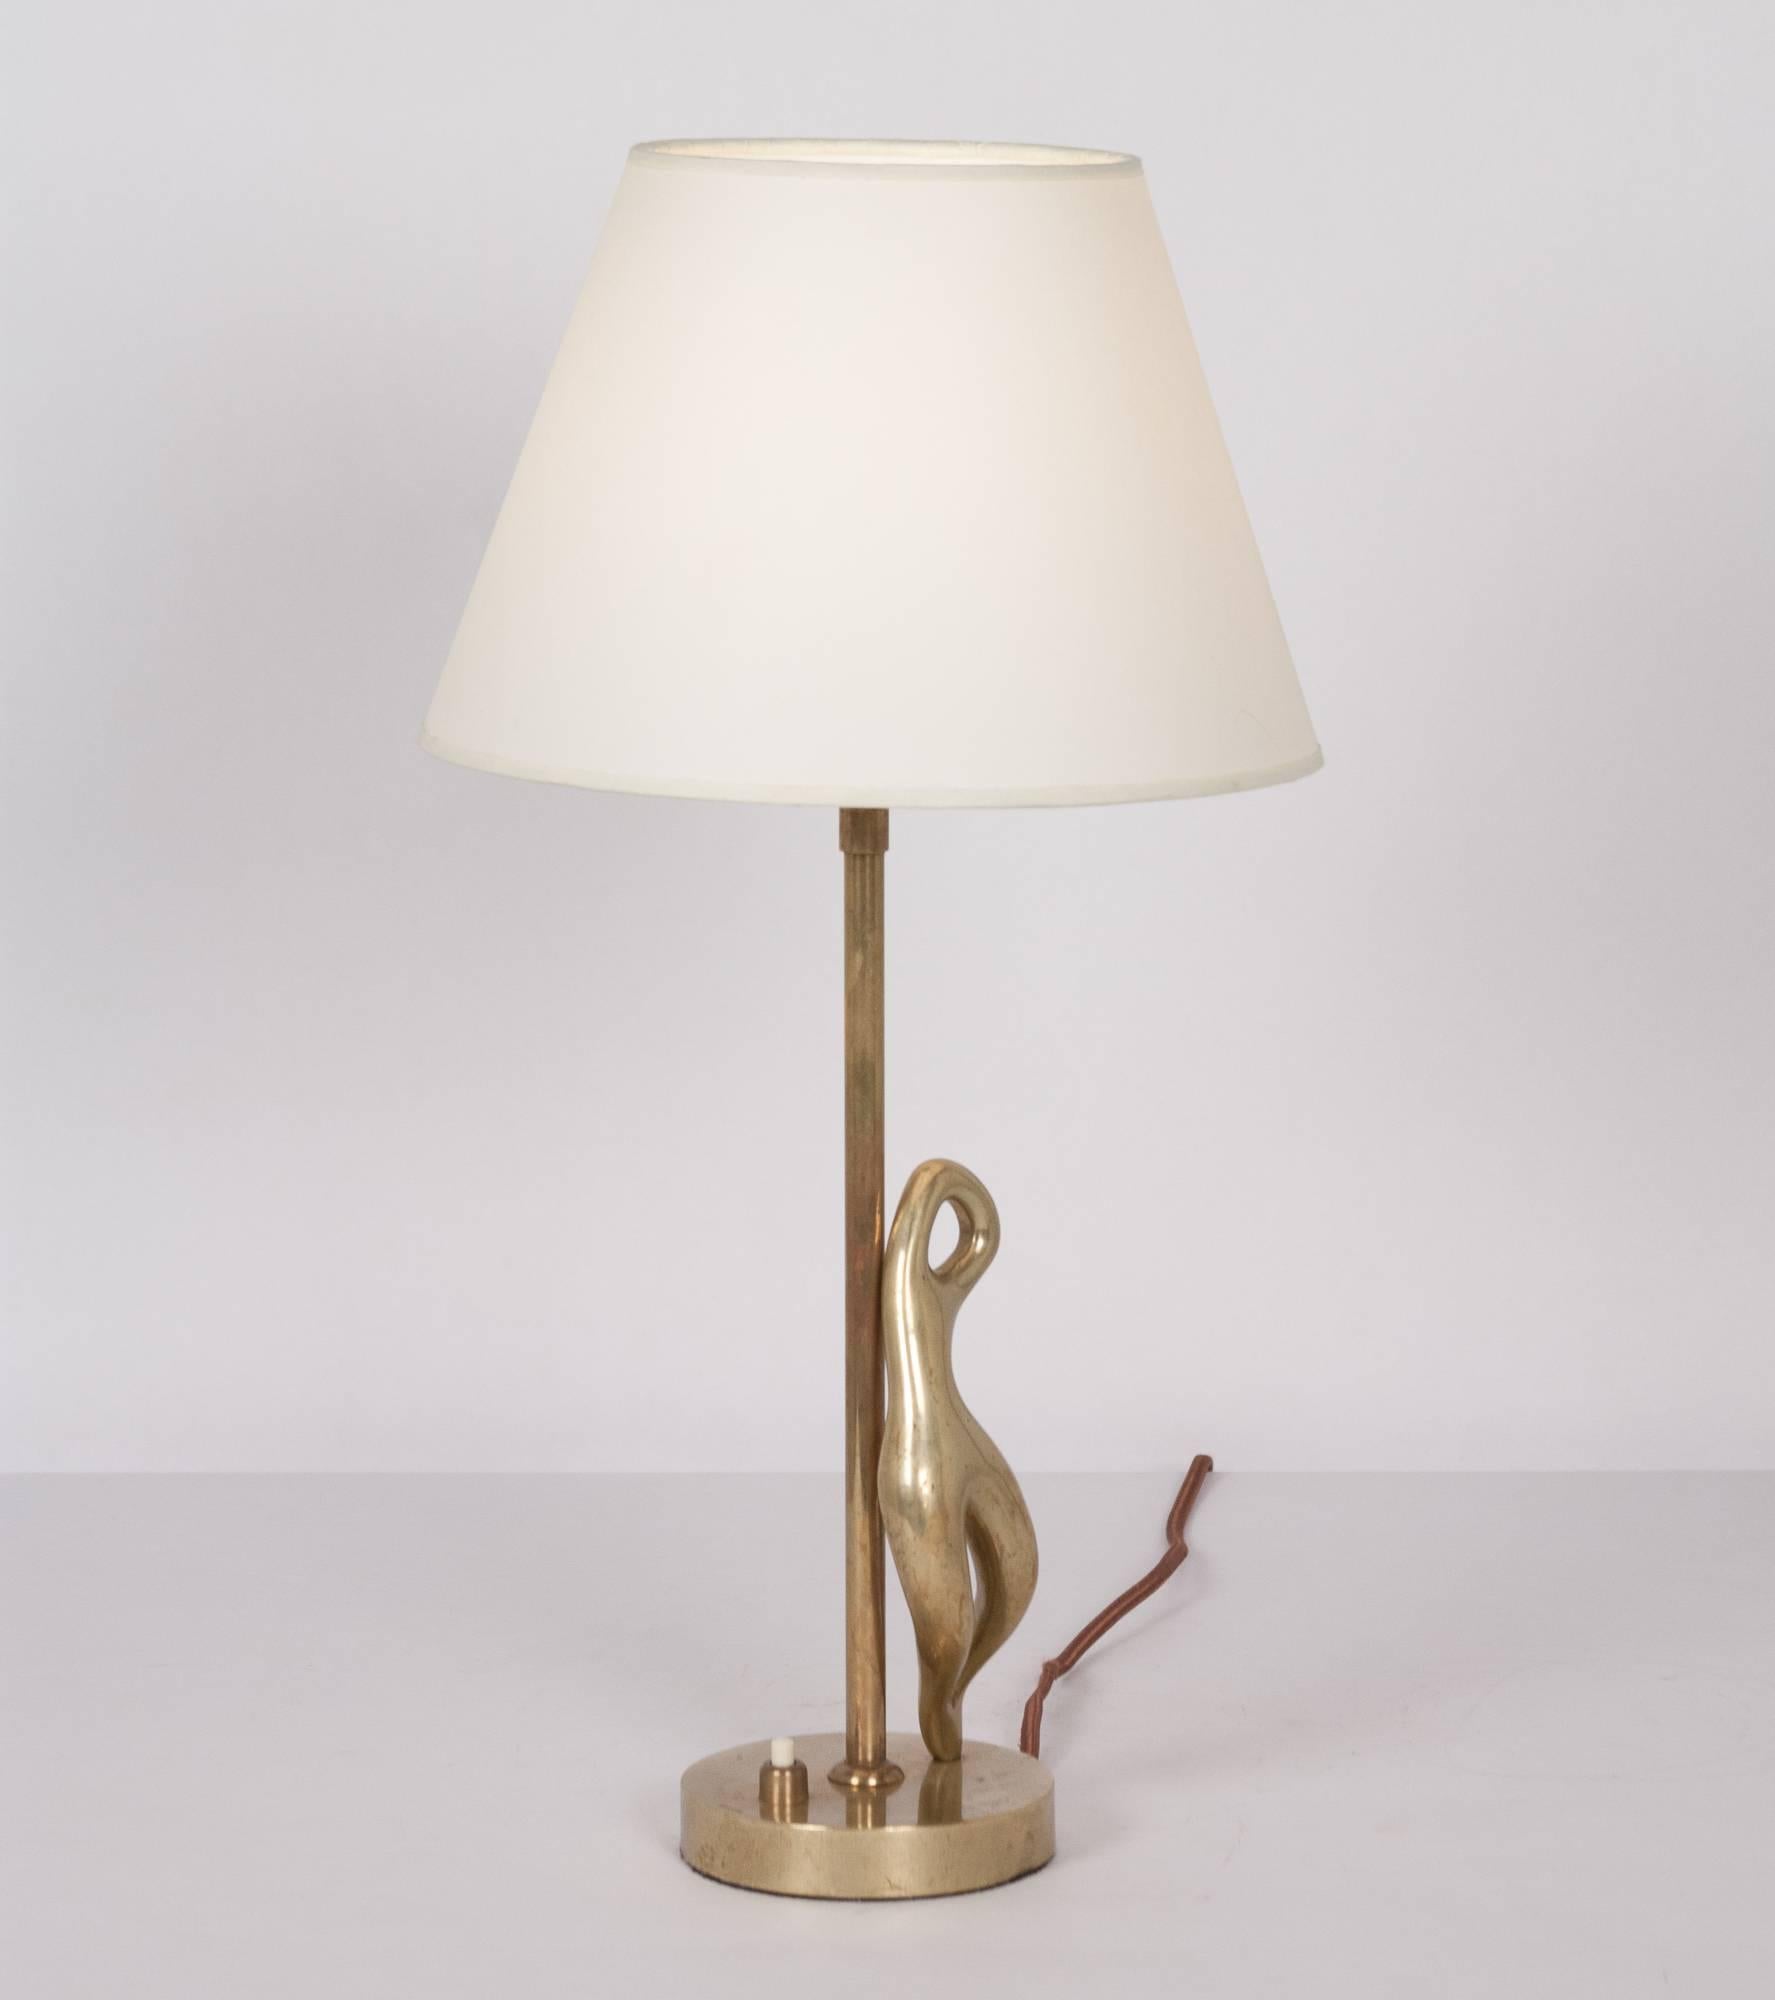 Abstract Bronze Figure Table Lamp, 1950s, by Ricardo Scarpa For Sale 1